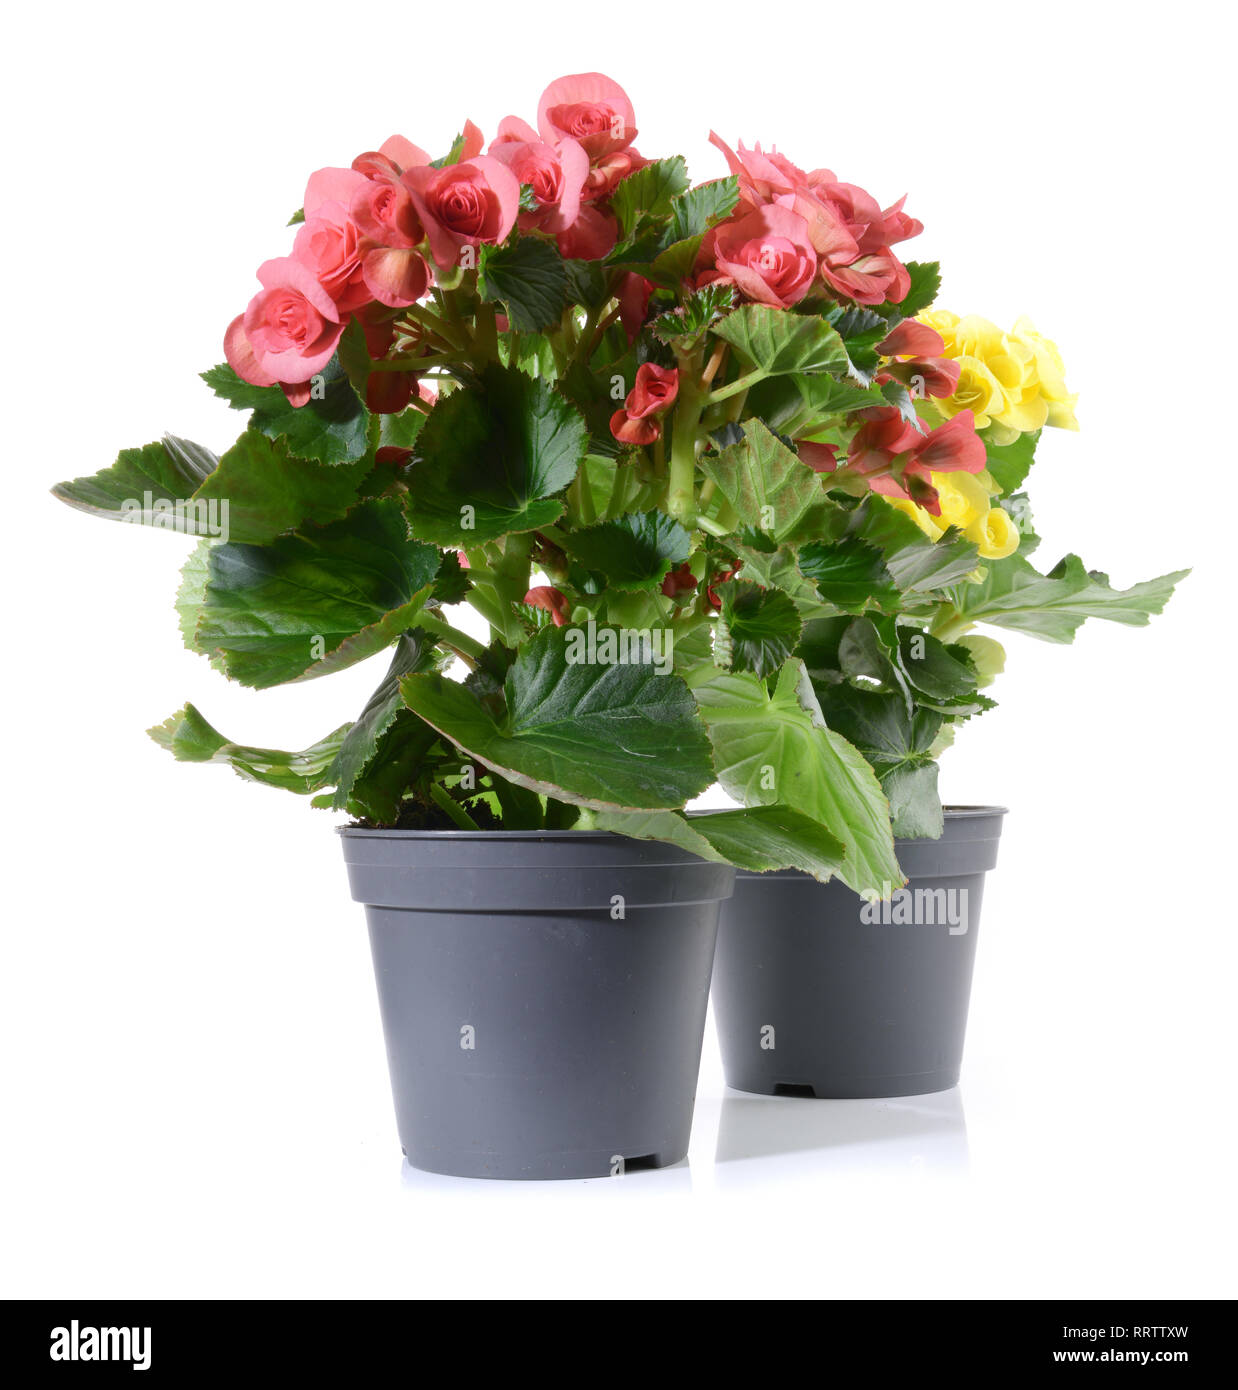 Plantinag - Begonia Flower in a Pot Stock Photo